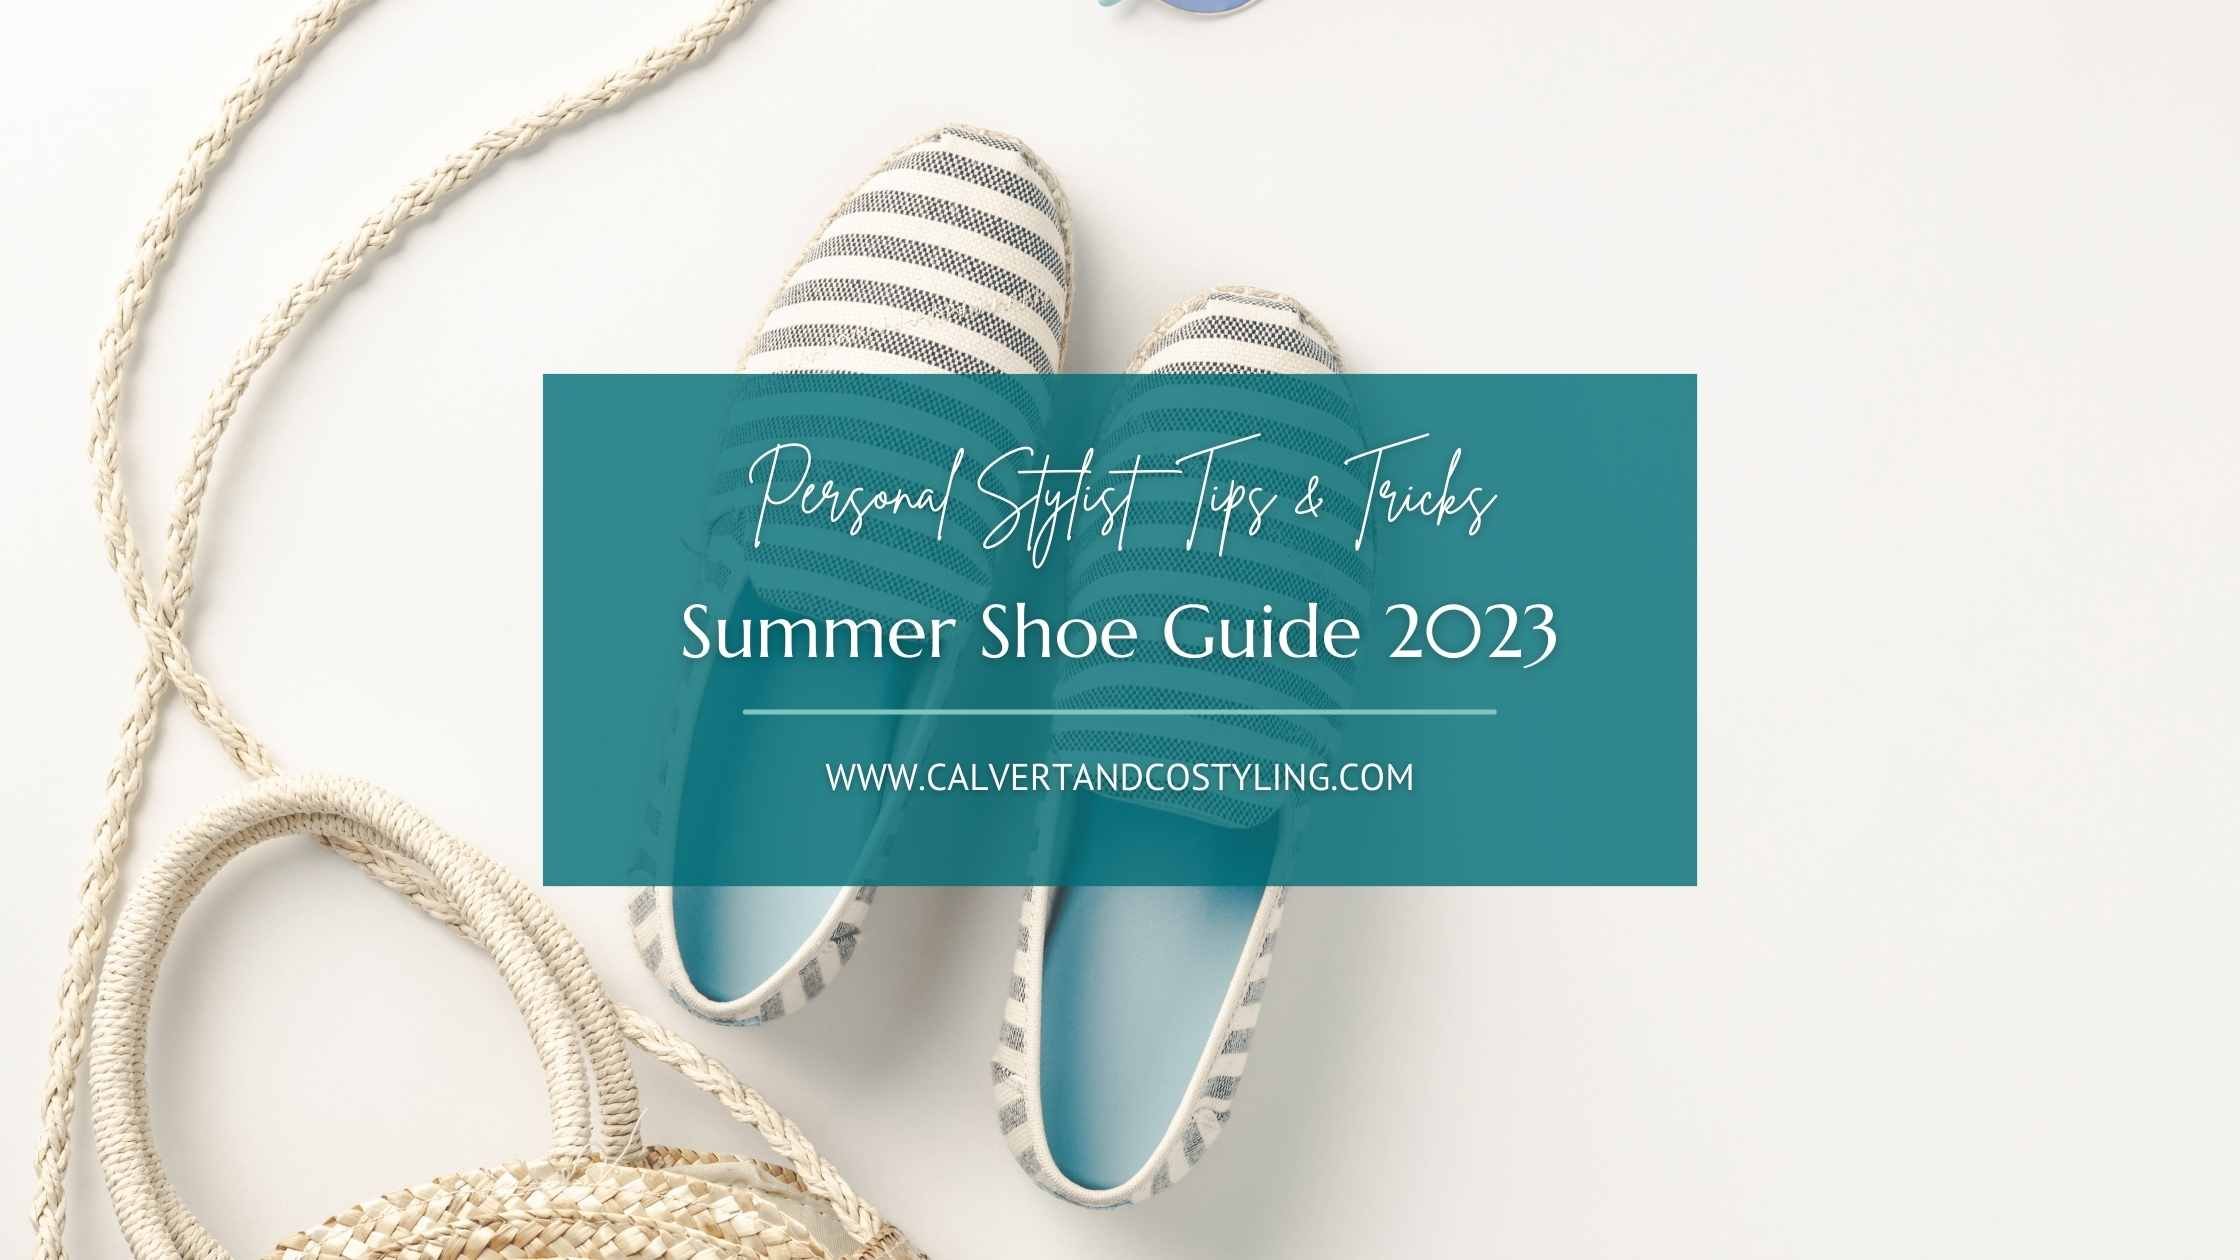 Summer Shoe Guide 2023 - Top Picks From A Personal Stylist